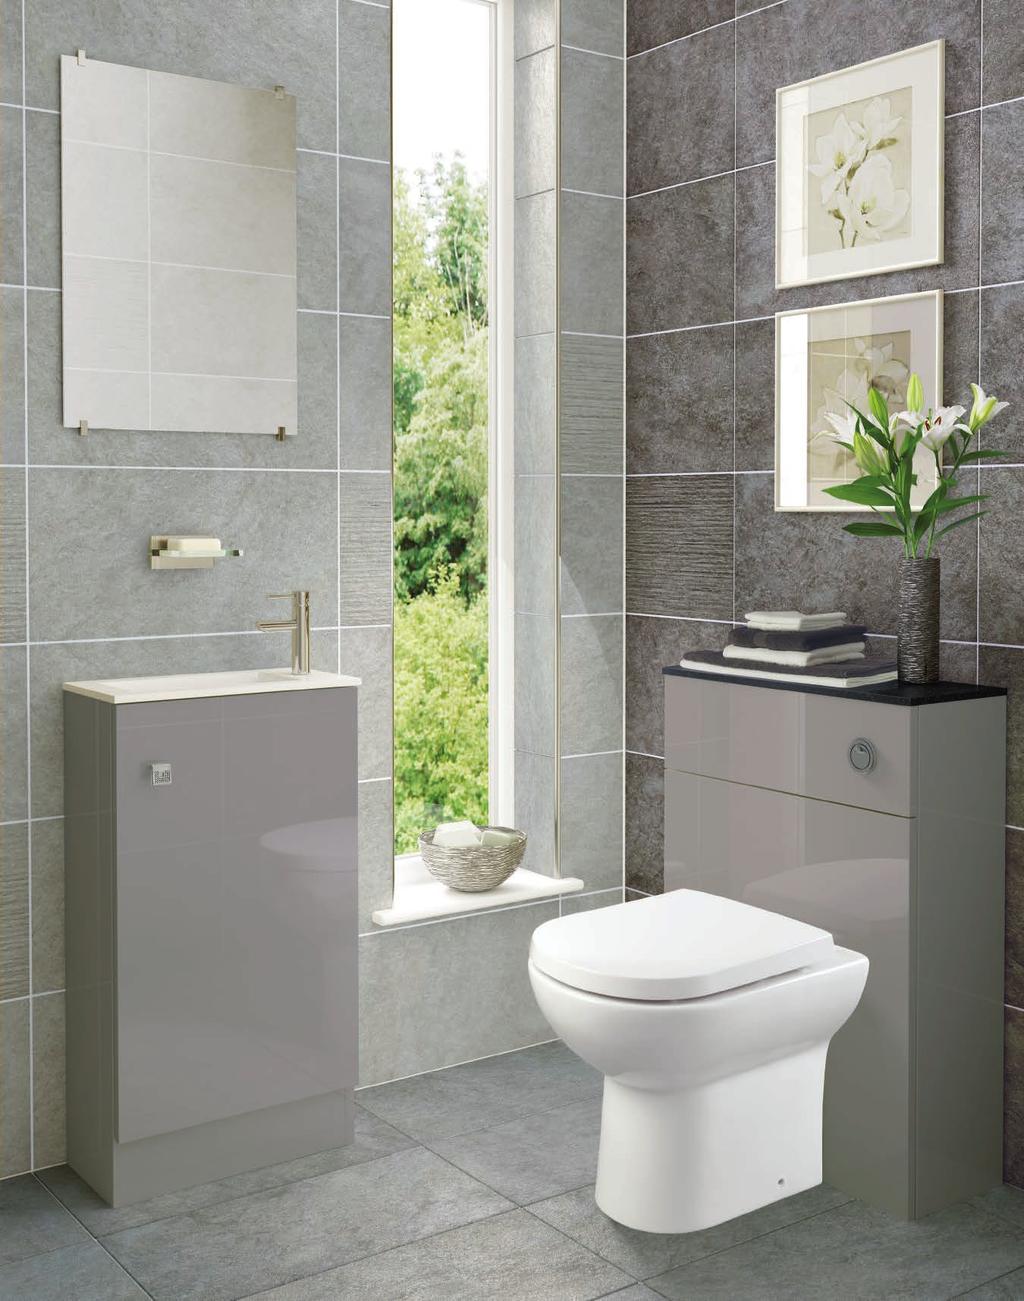 image gloss grey mist A 450mm wide floor mounted Mini Cloakroom unit is shown in